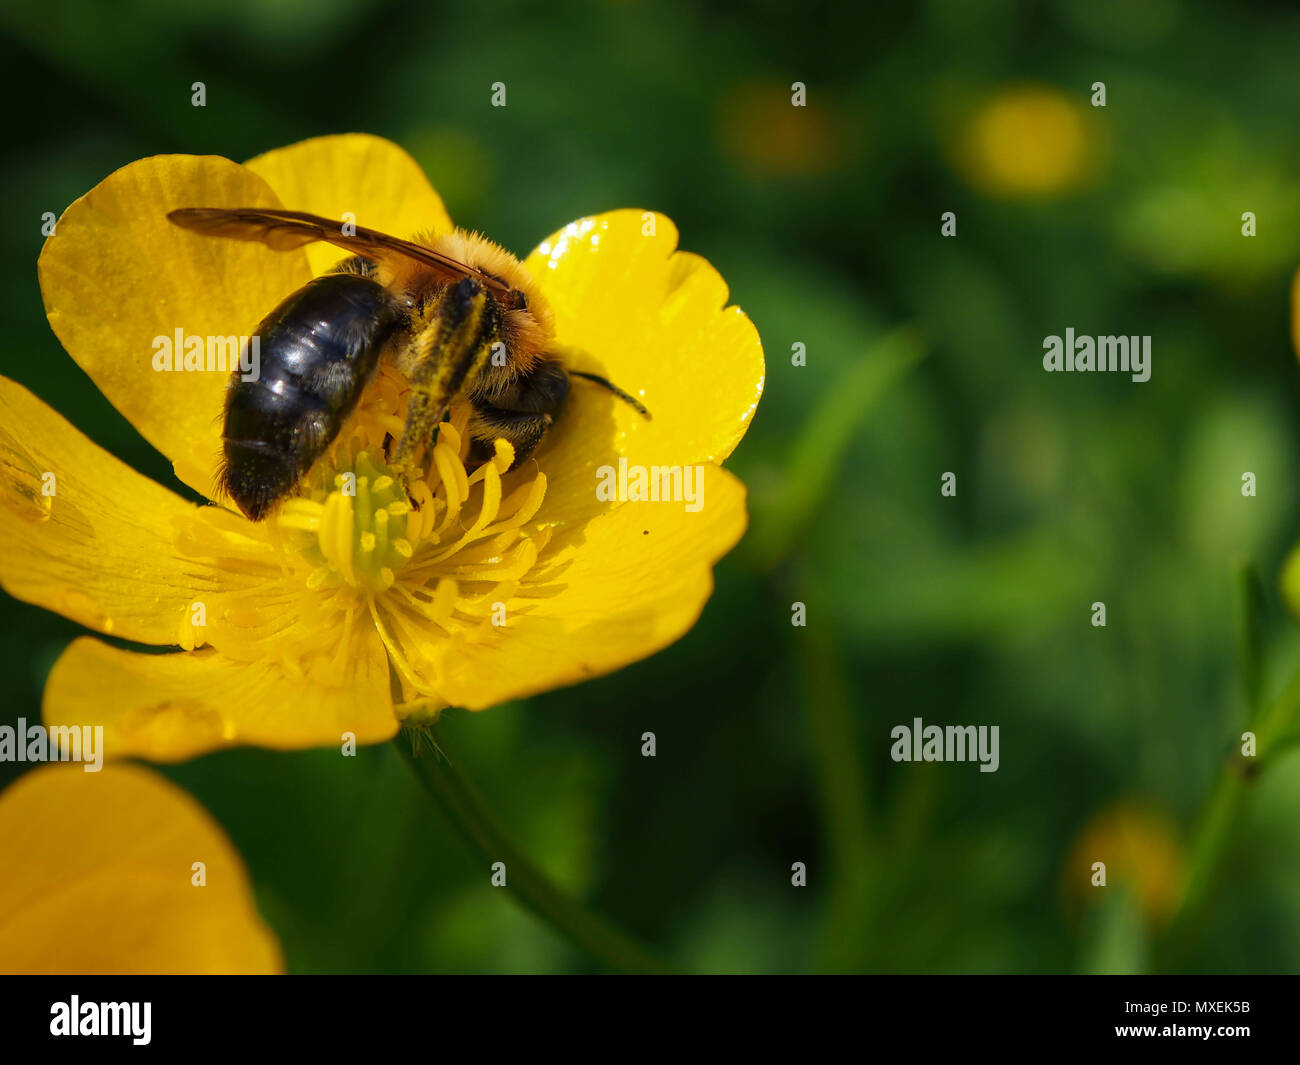 A honey bee collects nectar from a buttercup wild flower Stock Photo